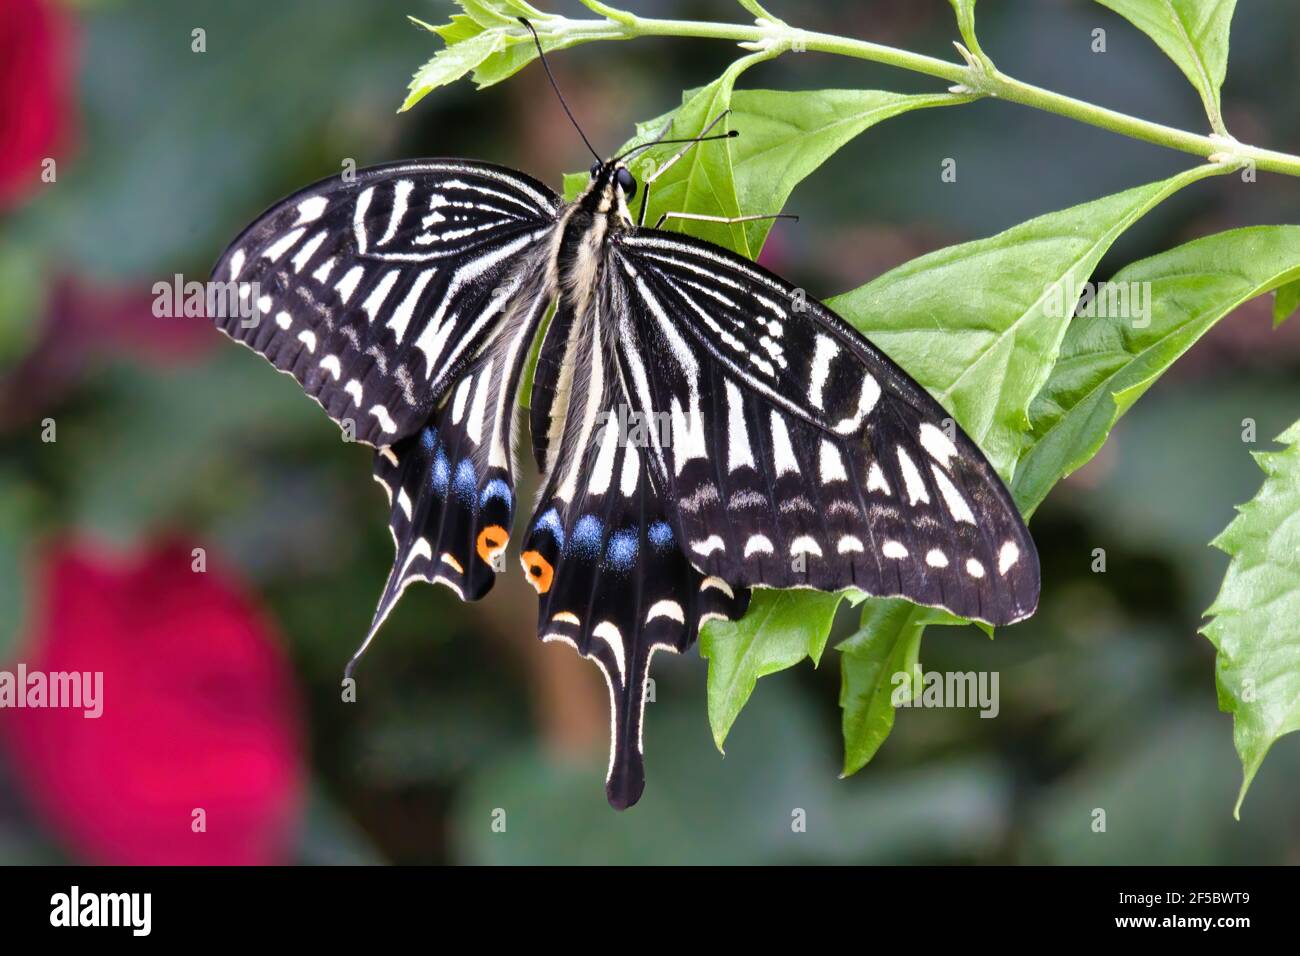 Delicate pattern wings of a swallowtail butterfly. Stock Photo